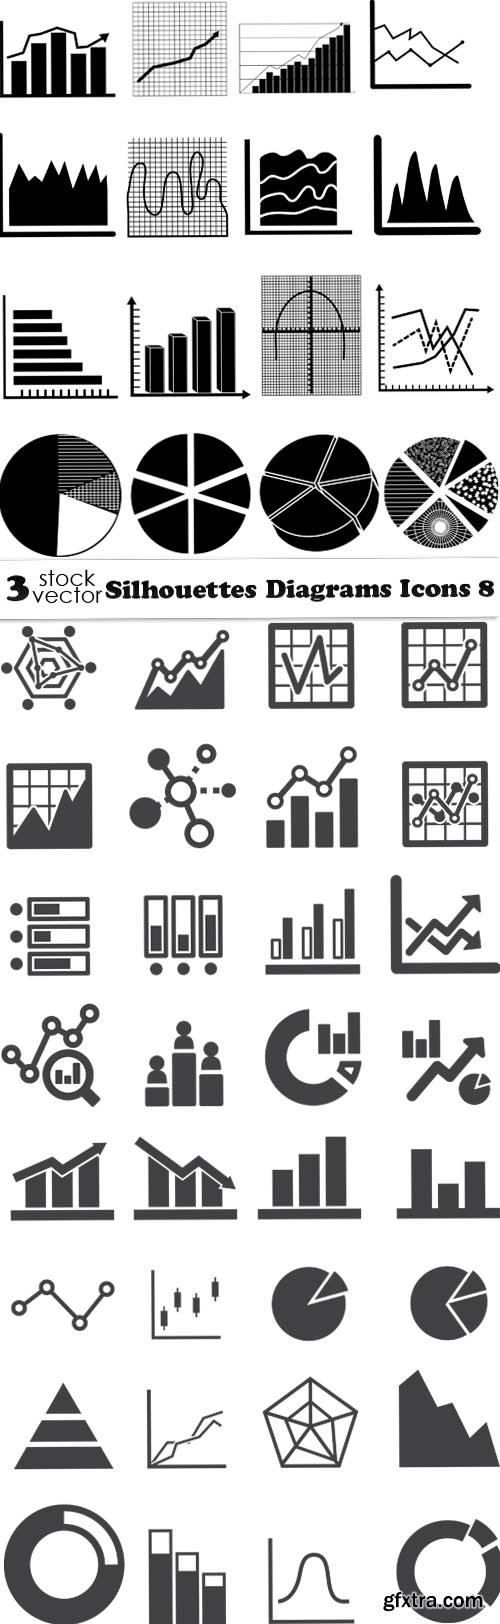 Vectors - Silhouettes Diagrams Icons 8